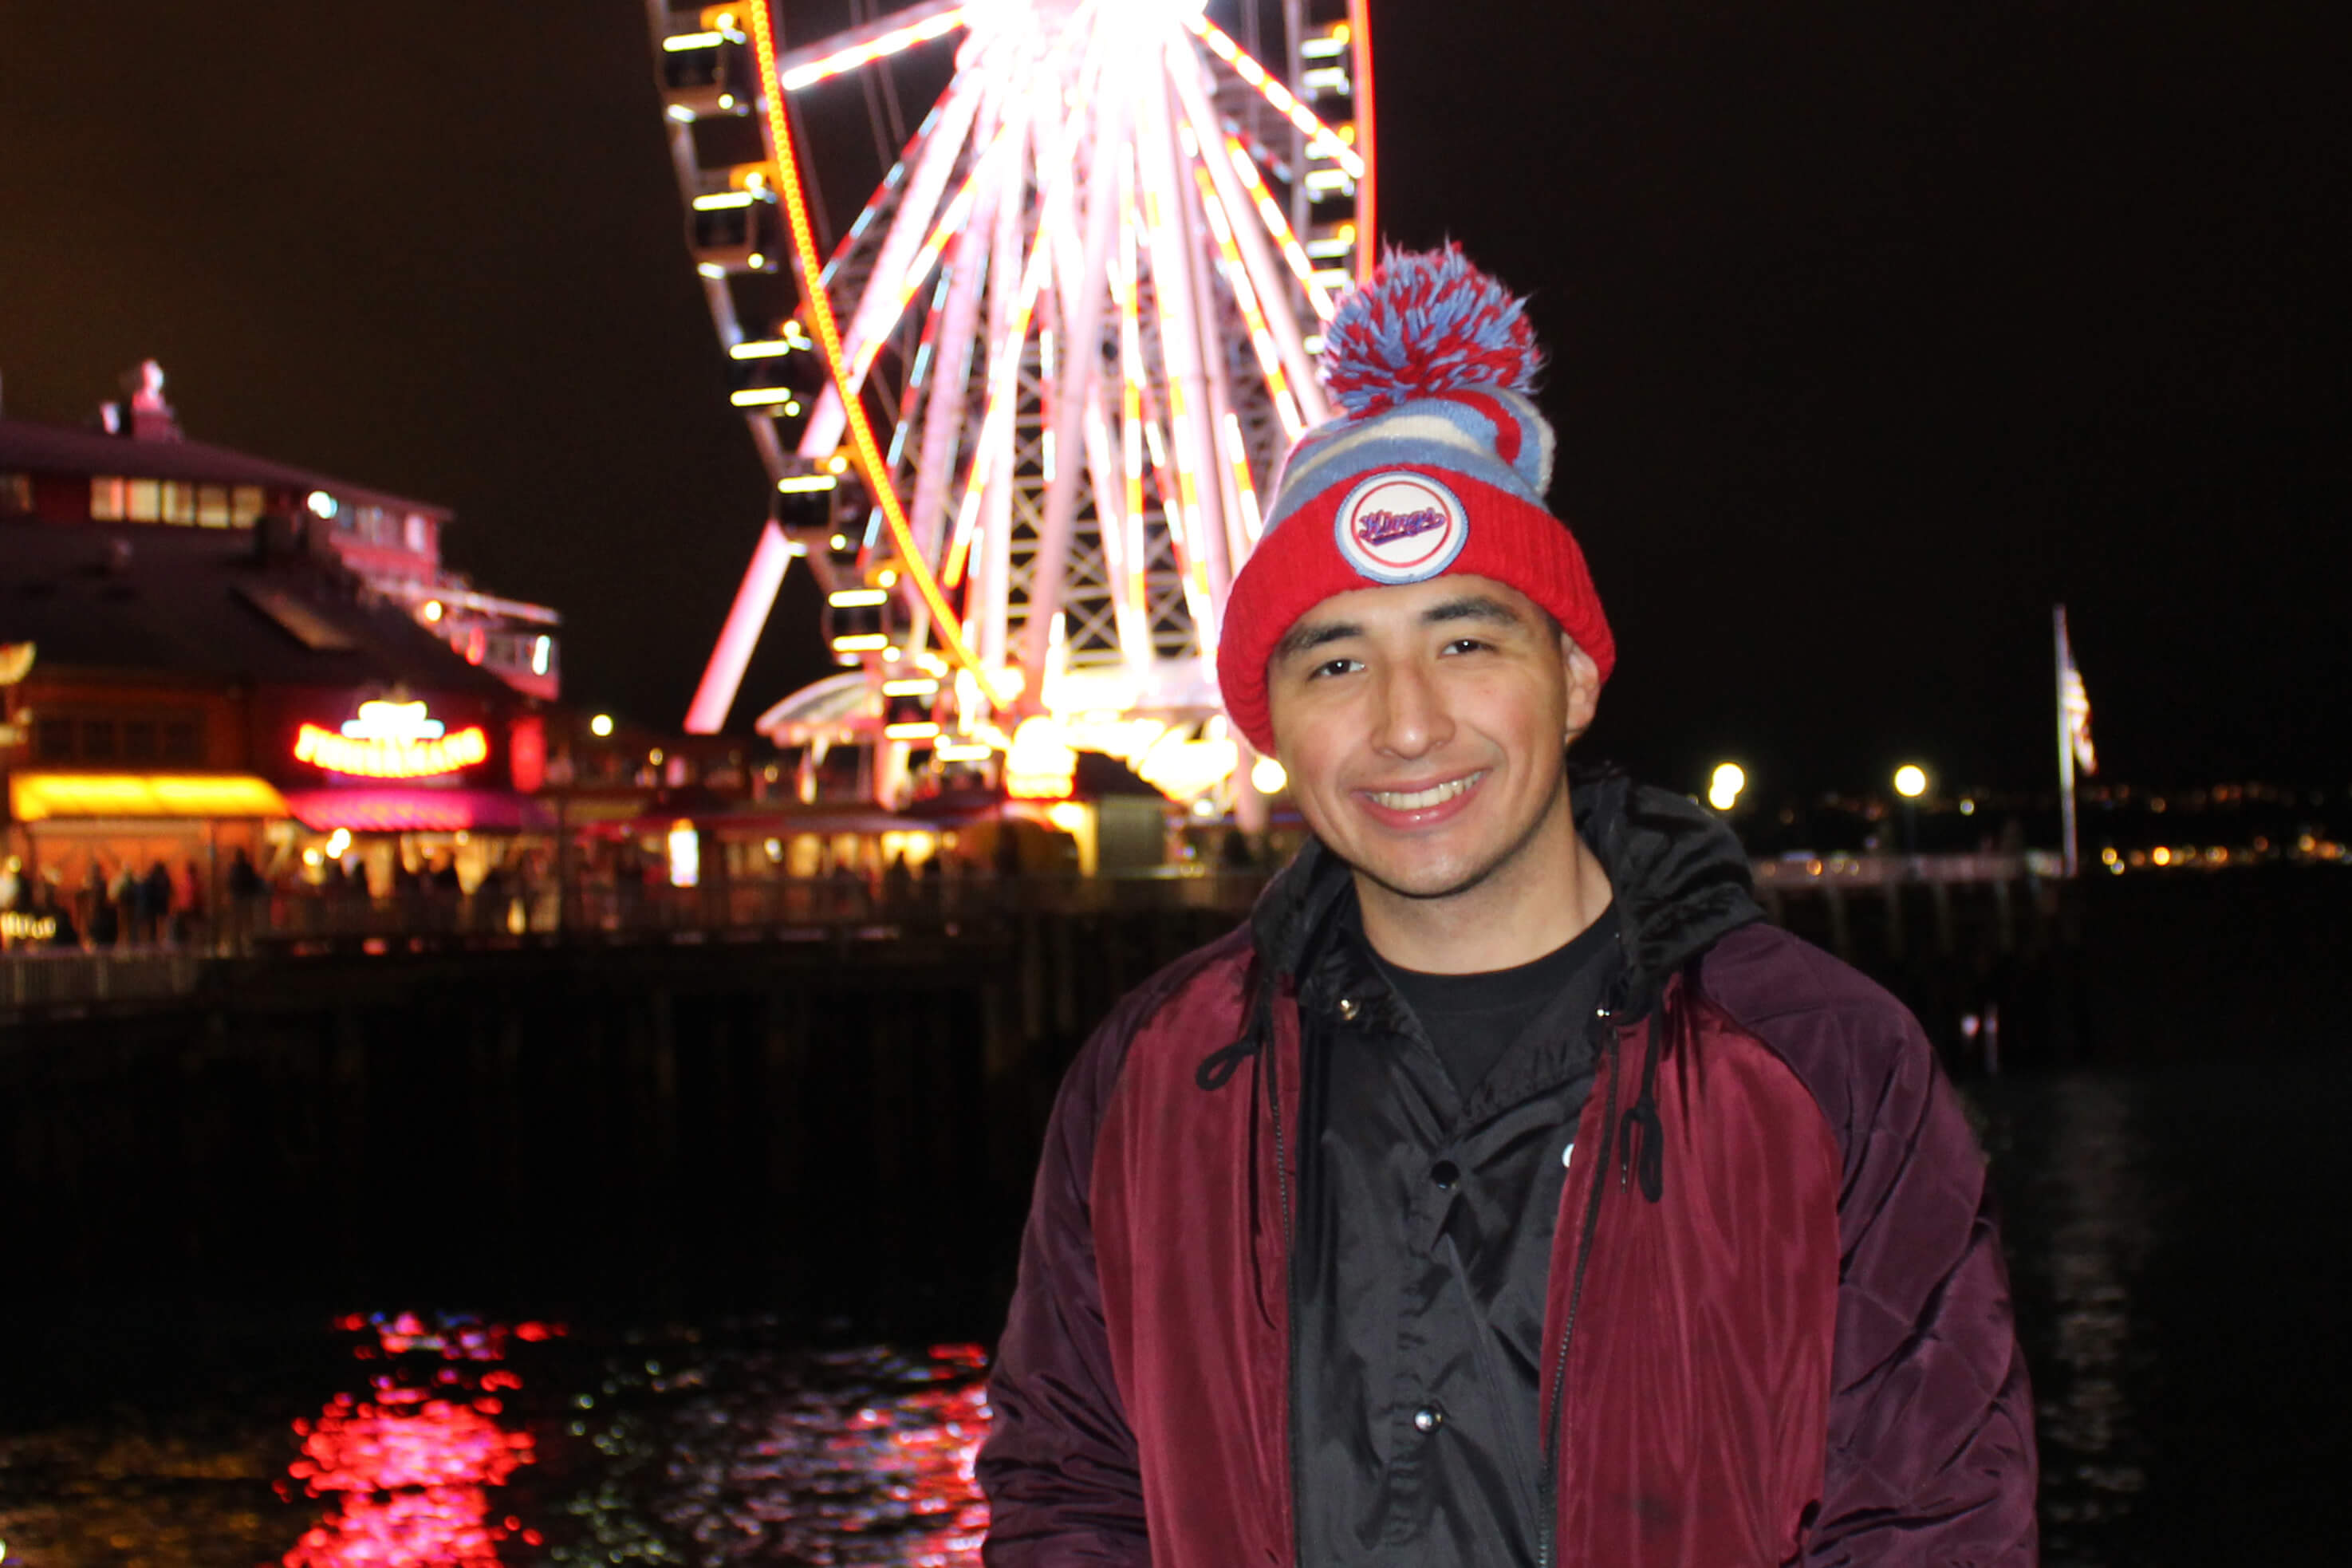 Victor Wilson smiles while standing in front of a ferris wheel at night